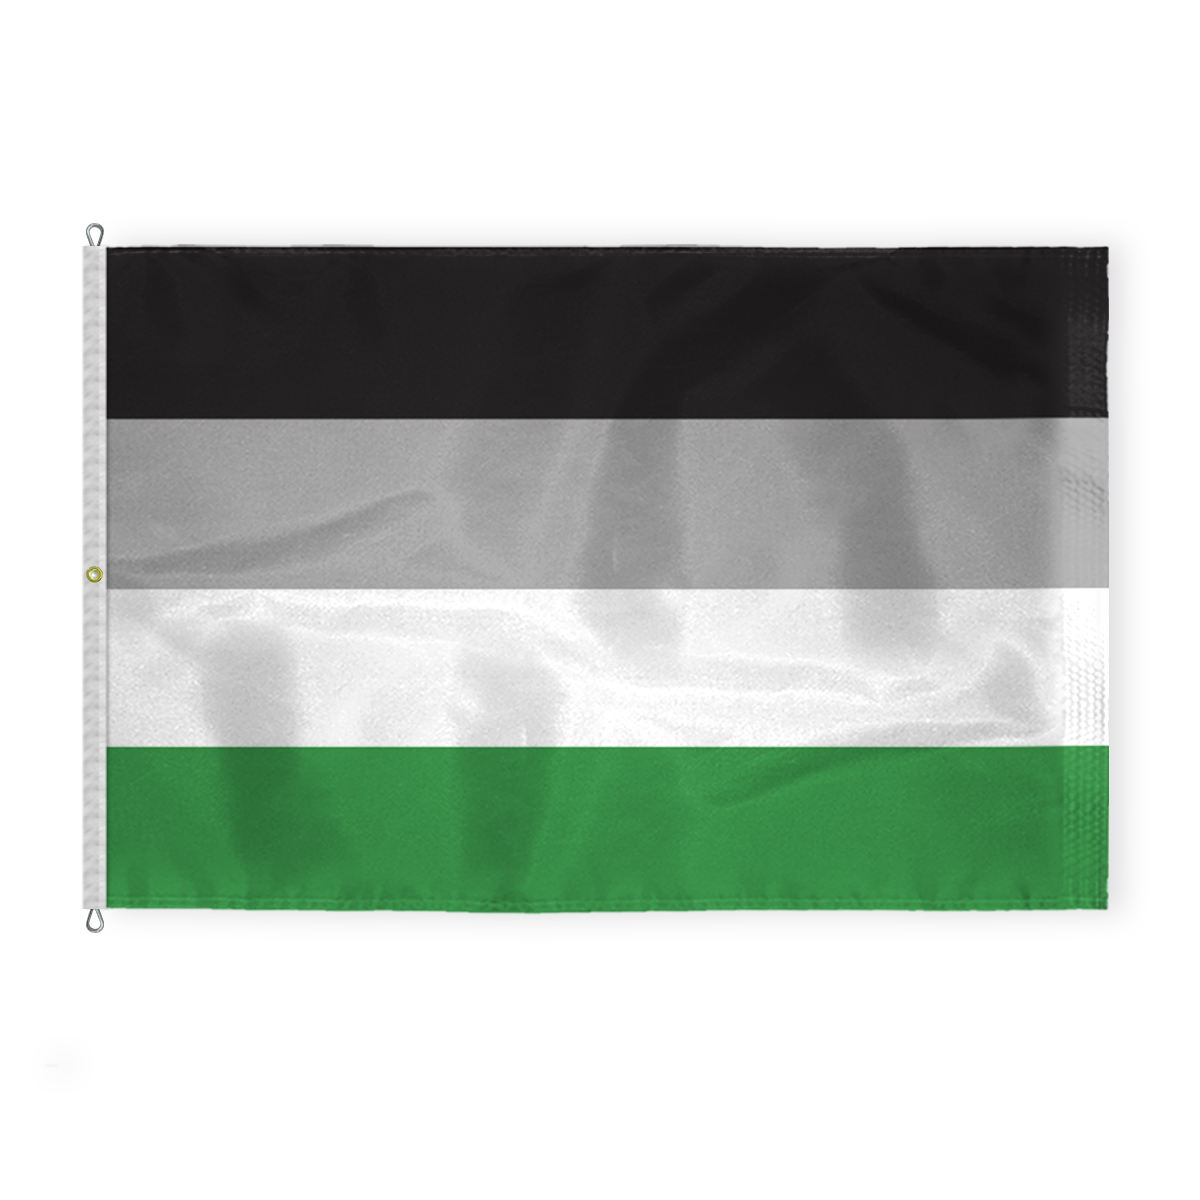 AGAS Large Androphilia Pride Flag 10x15 Ft - Double Sided